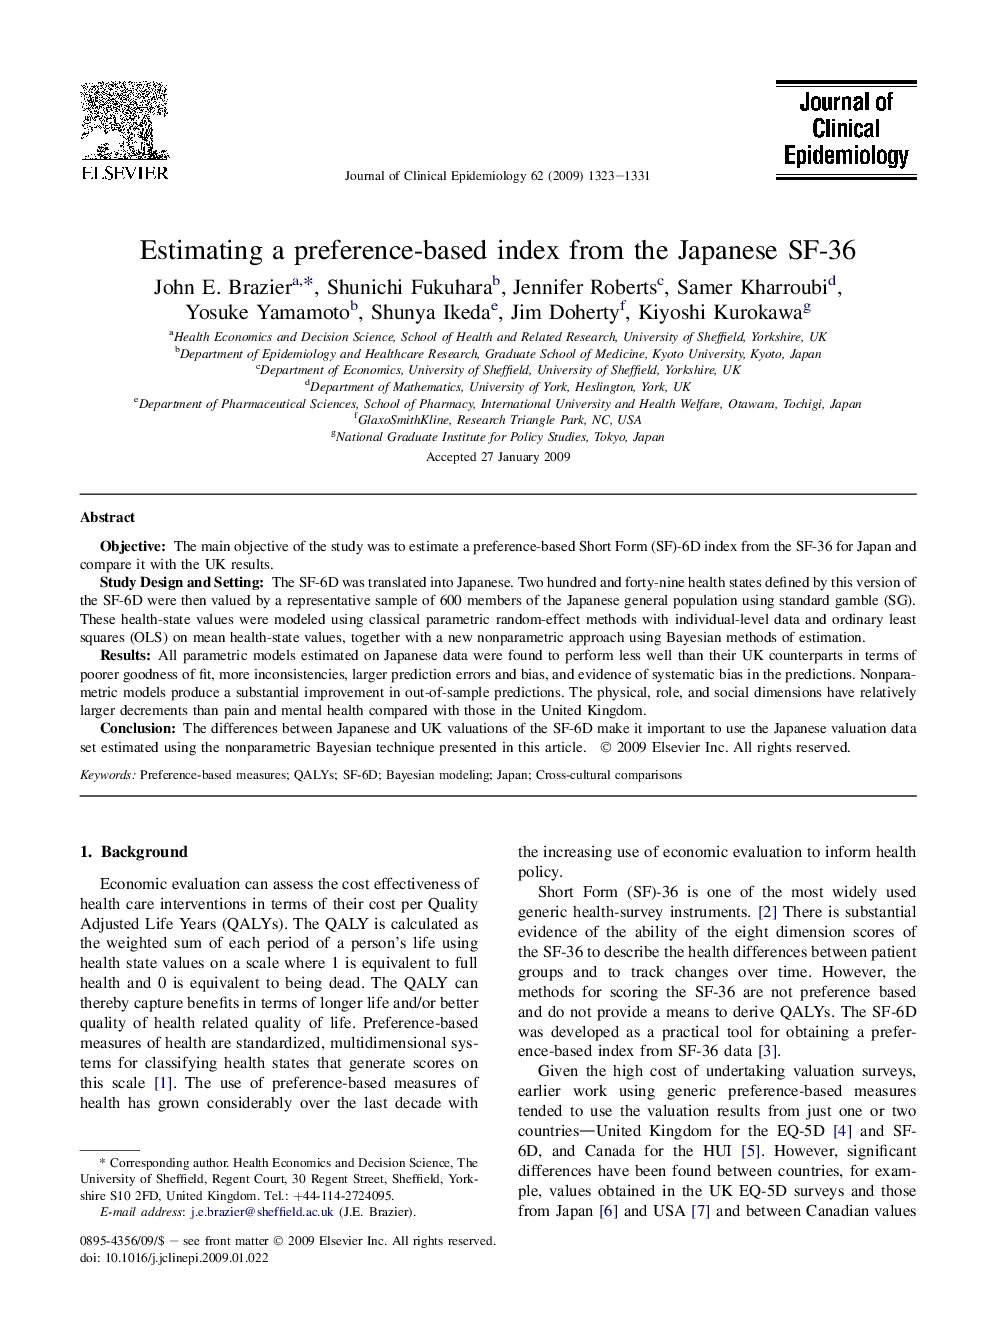 Estimating a preference-based index from the Japanese SF-36